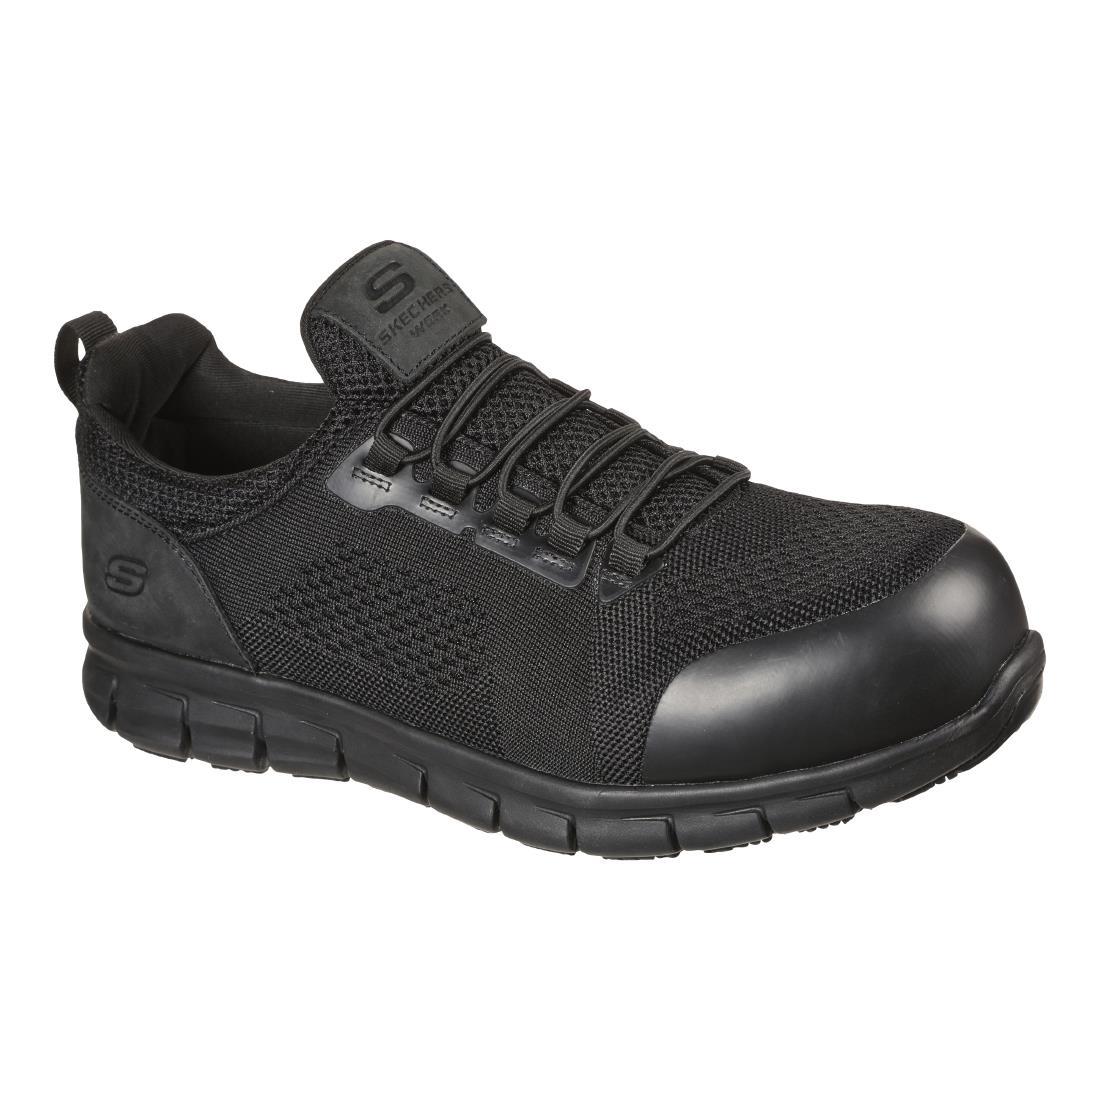 Skechers Safety Shoe with Steel Toe Cap Size 46 - BB675-46  - 1